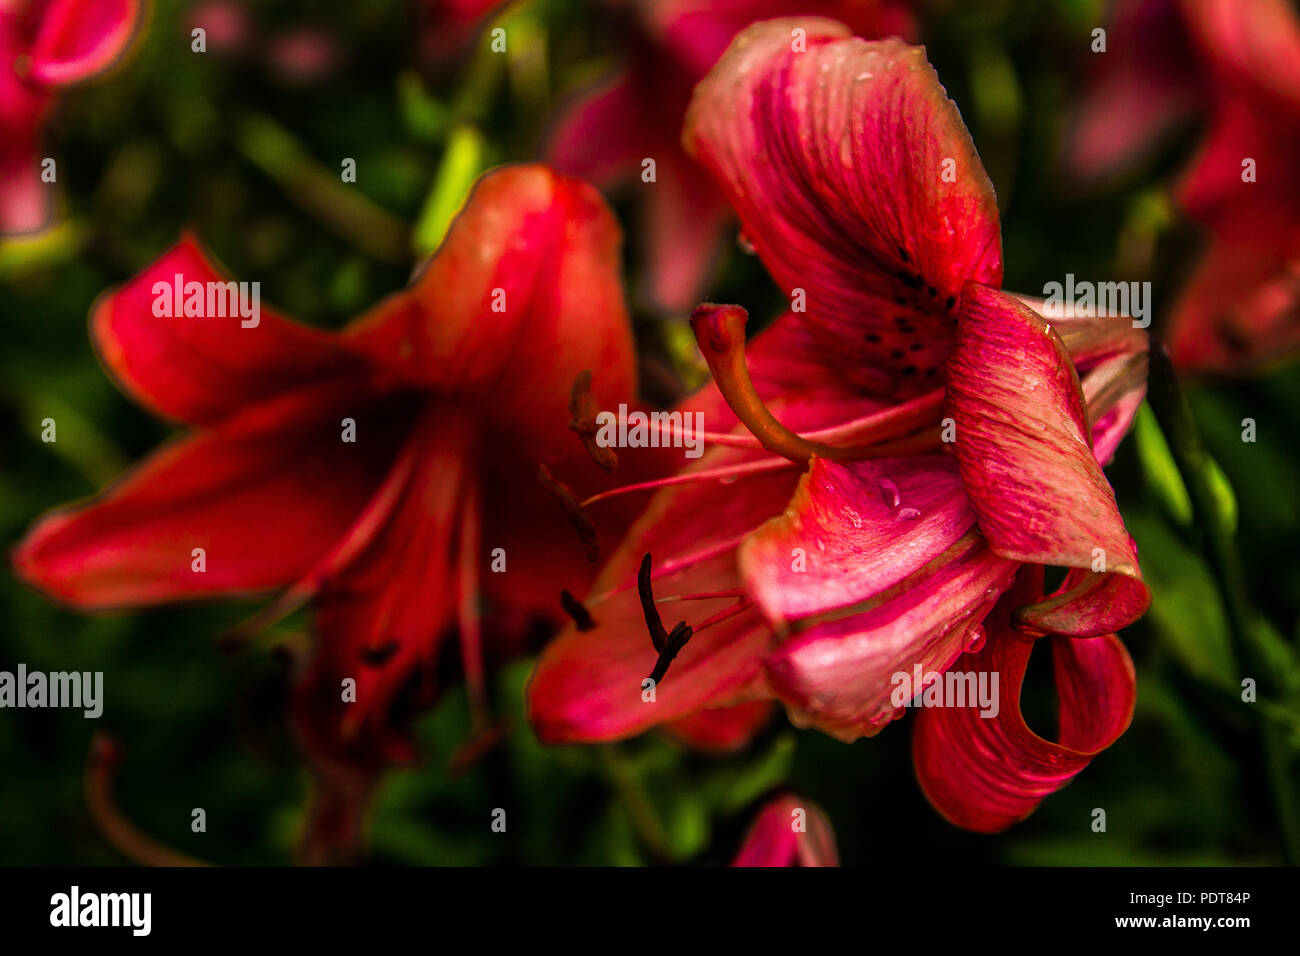 Blossoming red lilies on a warm summer evening Stock Photo